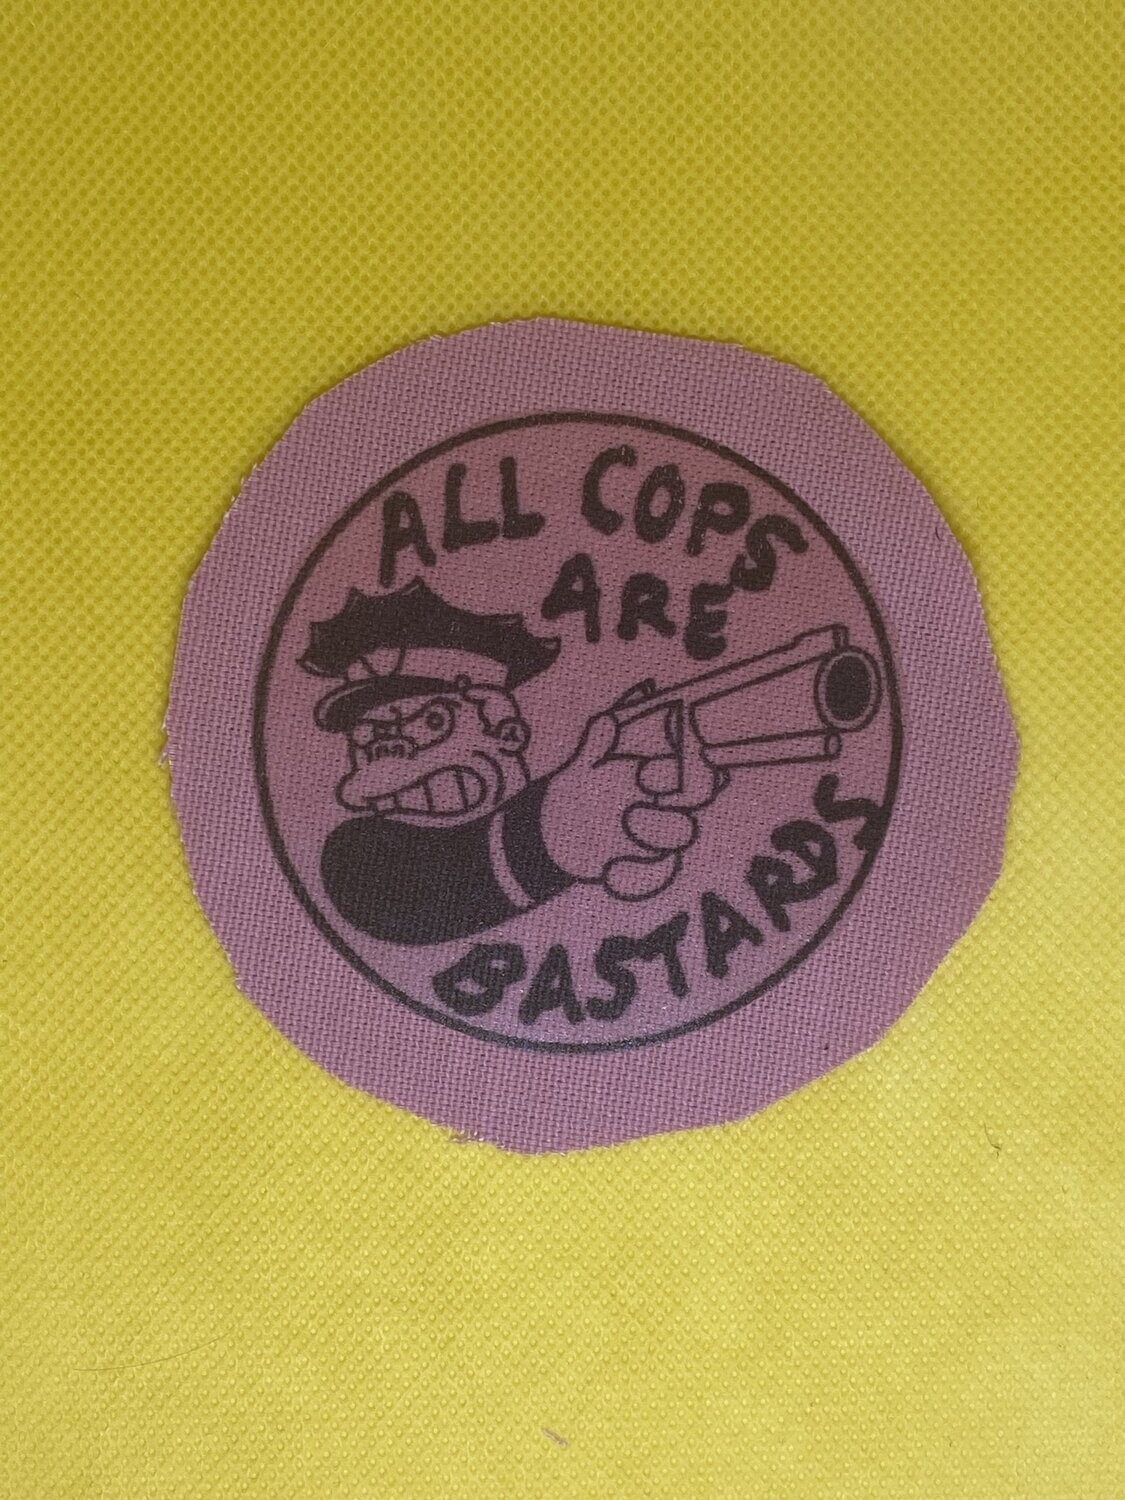 All cops are bastards Patch